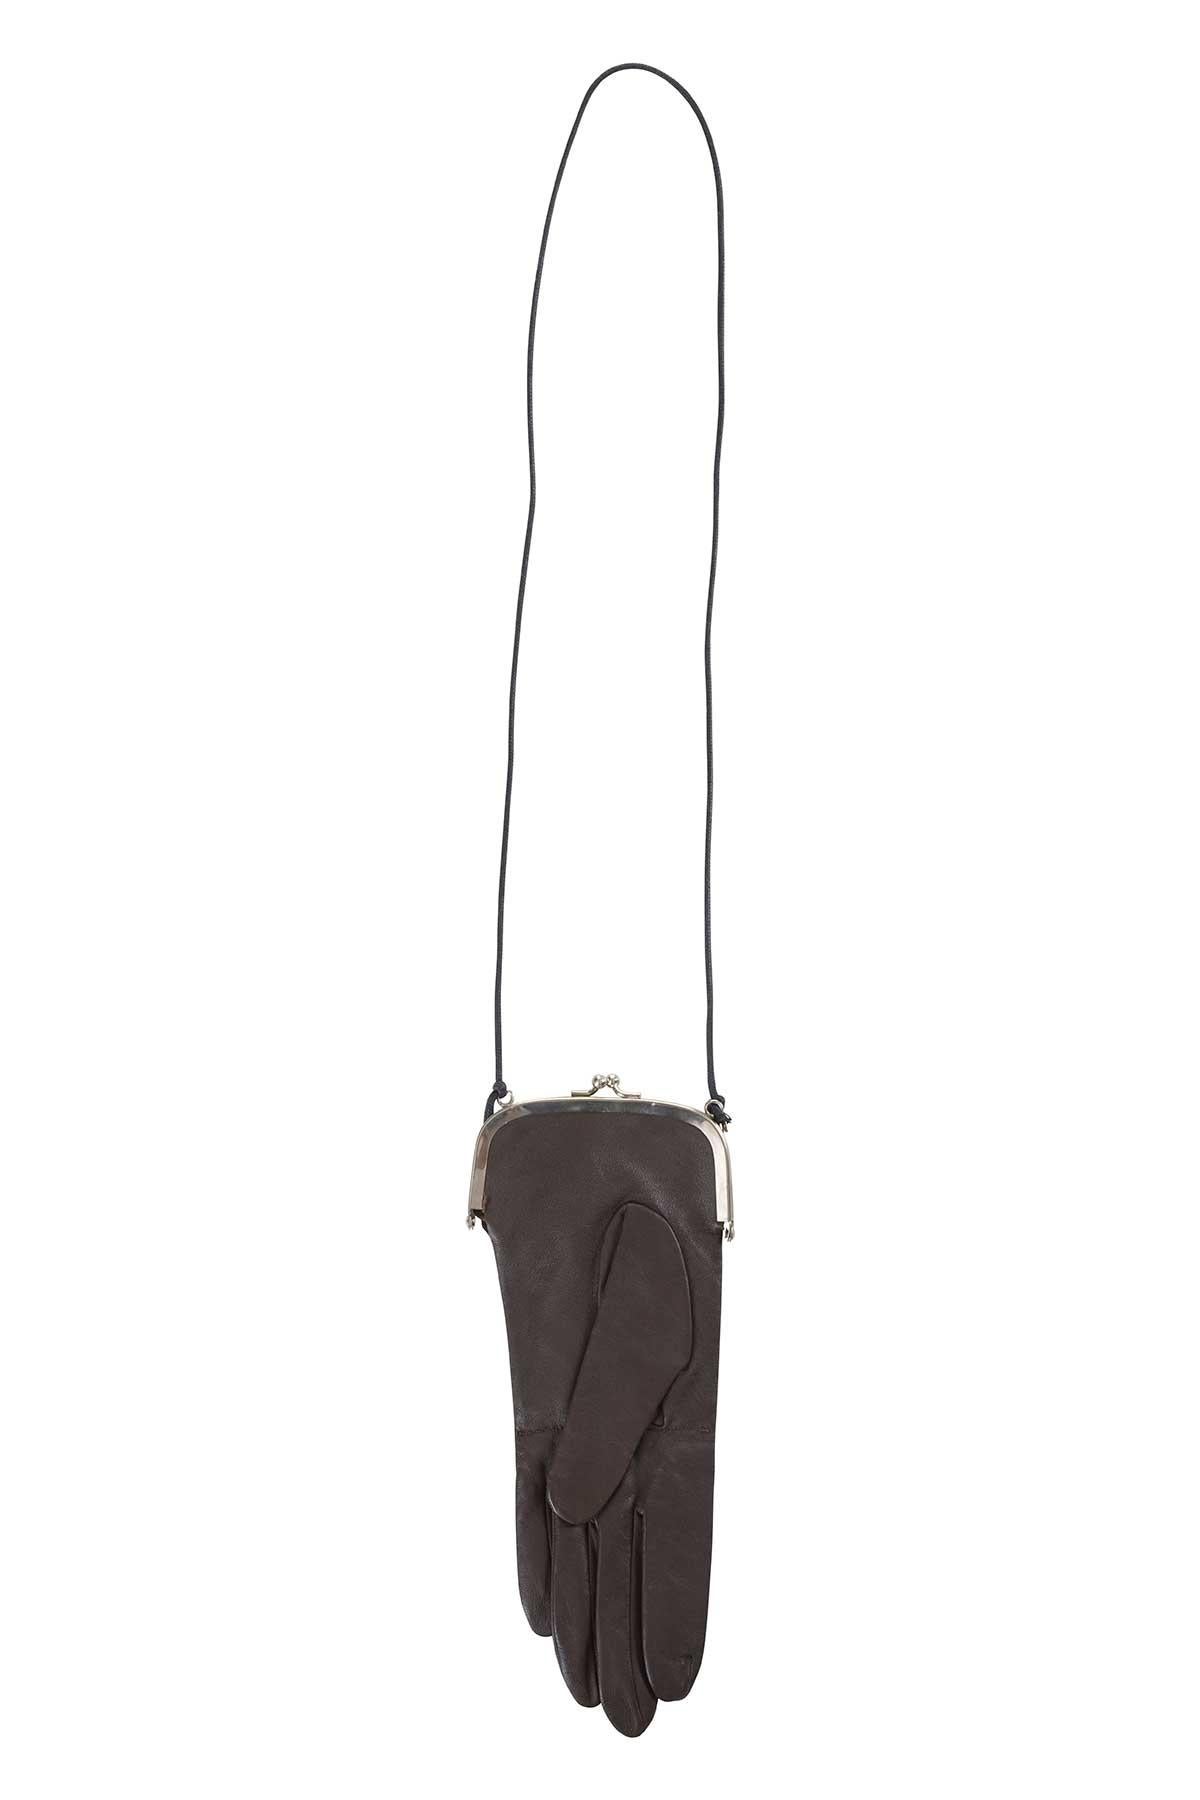 Spring Summer 1999 iconic and rare brown leather glove purse necklace by Maison Martin Margiela.
The composition is 100% leather. 